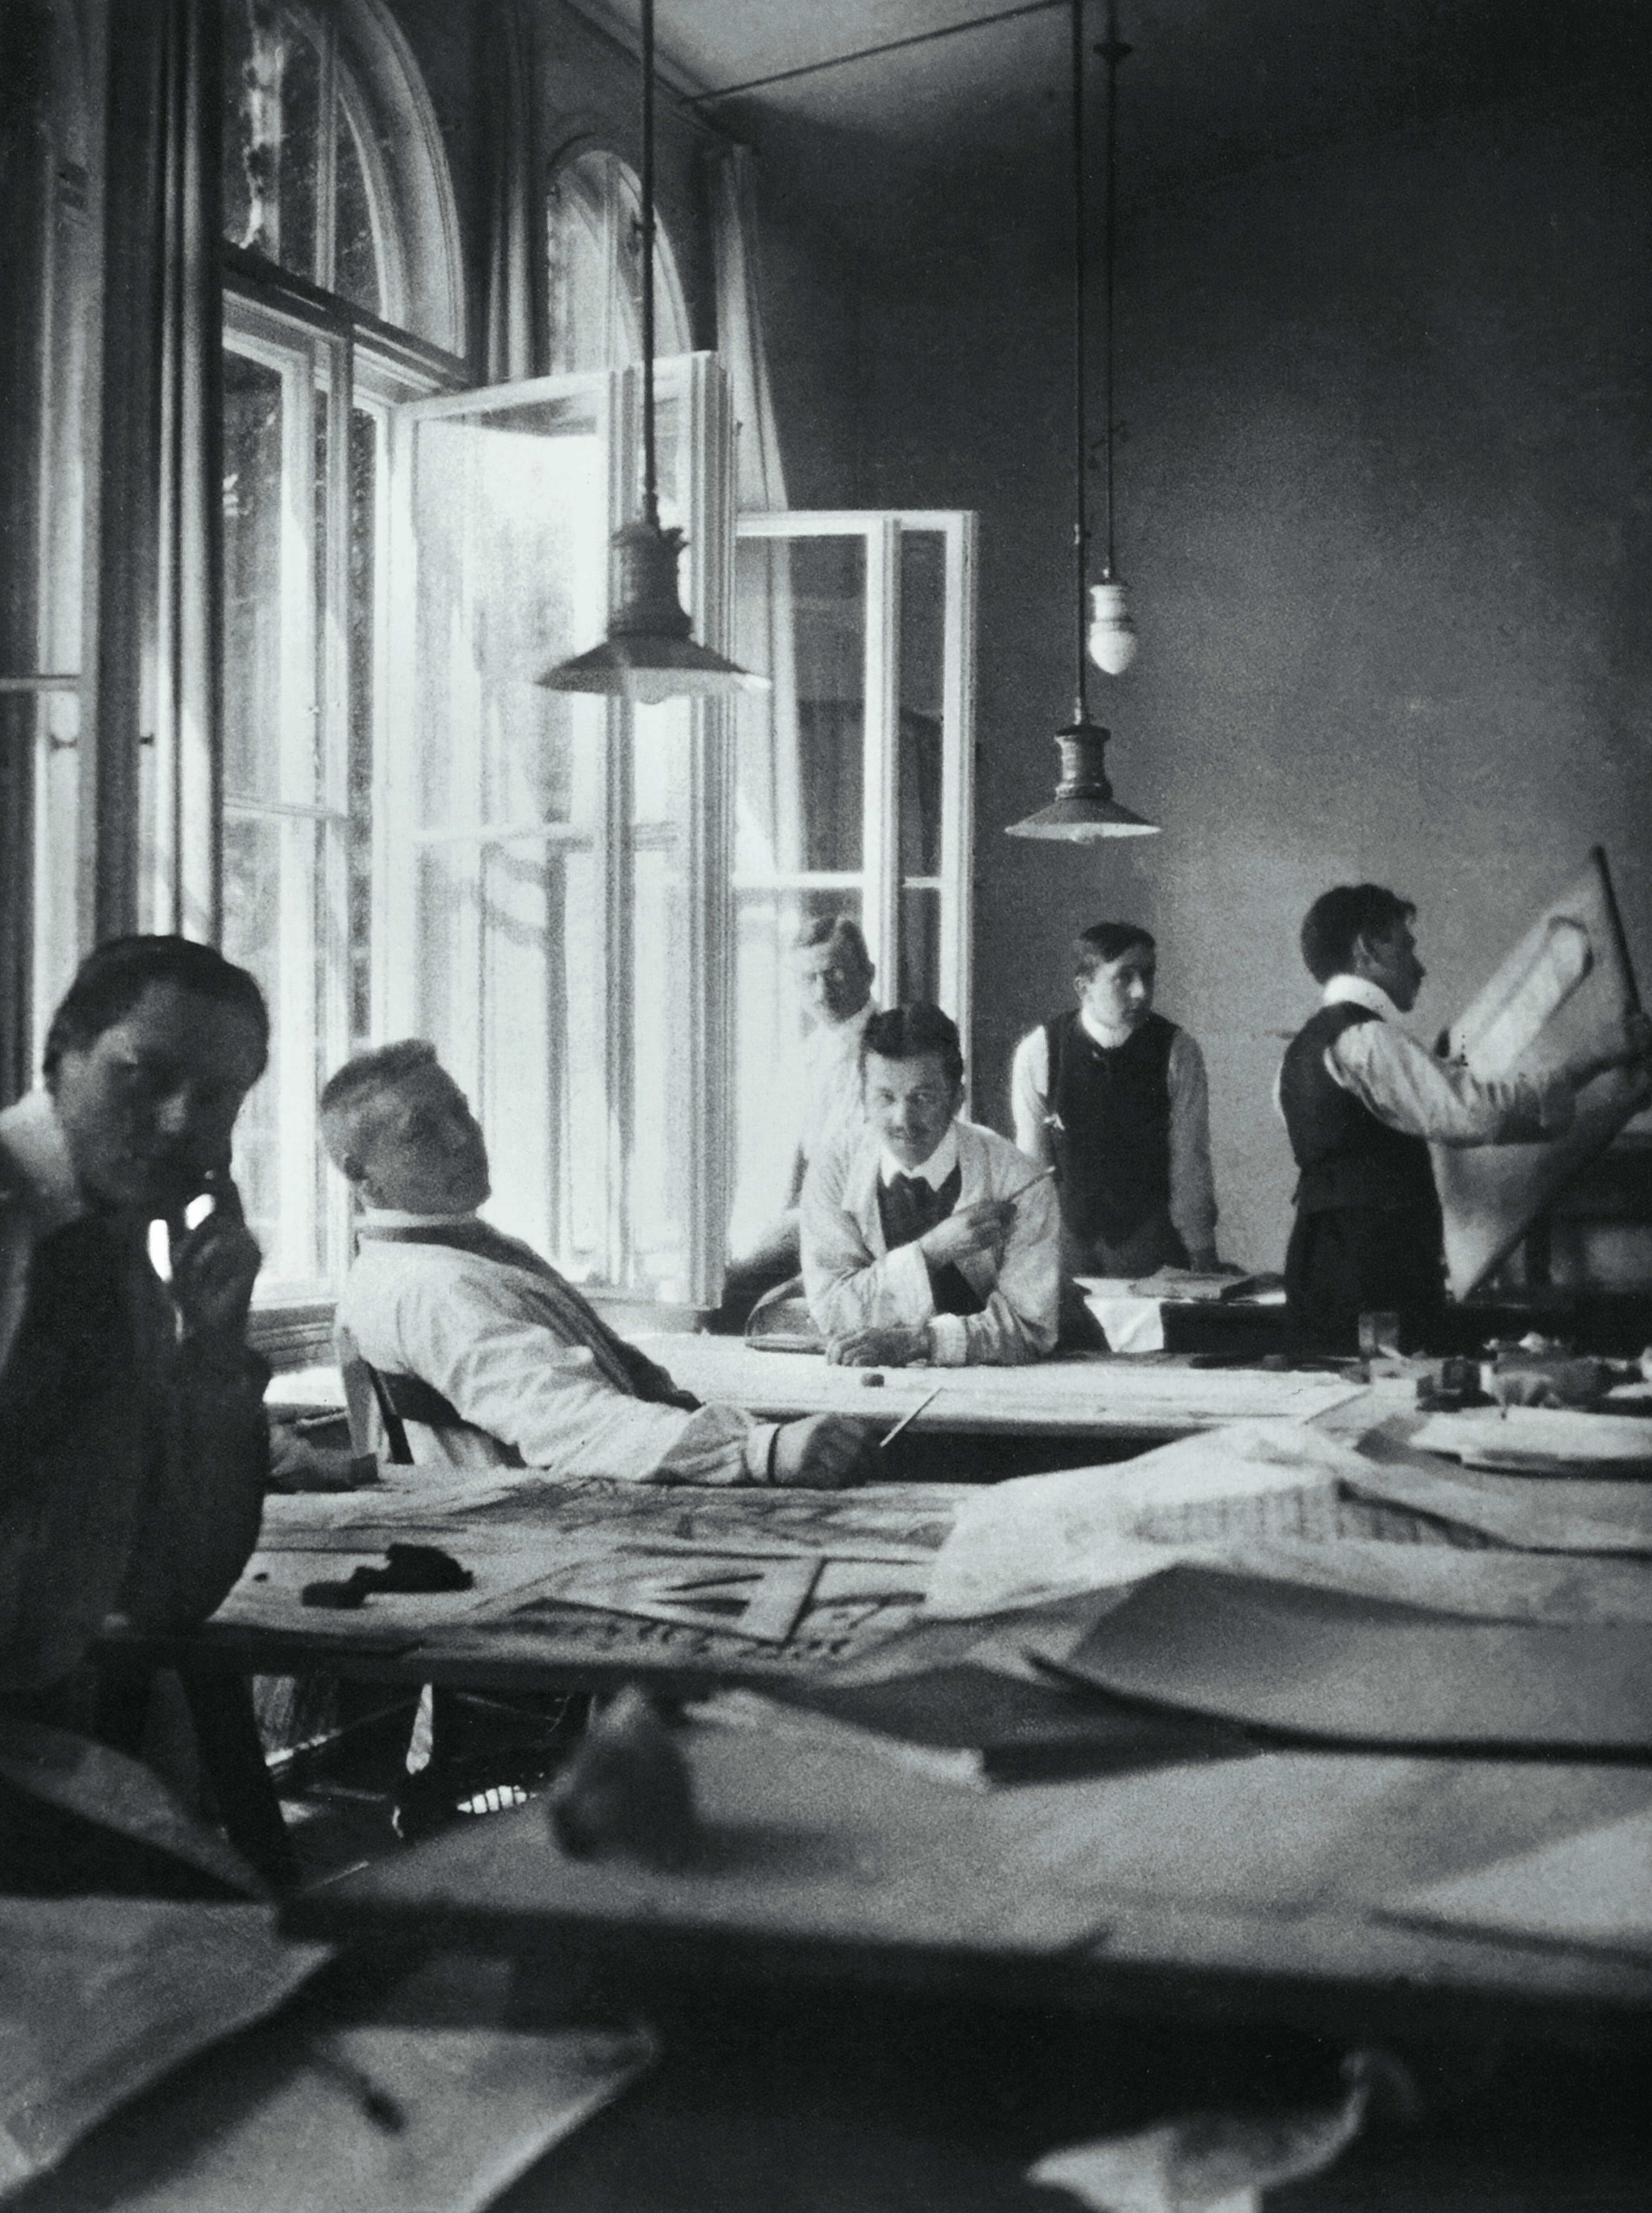 The elite students that remade the world under Walter Gropius